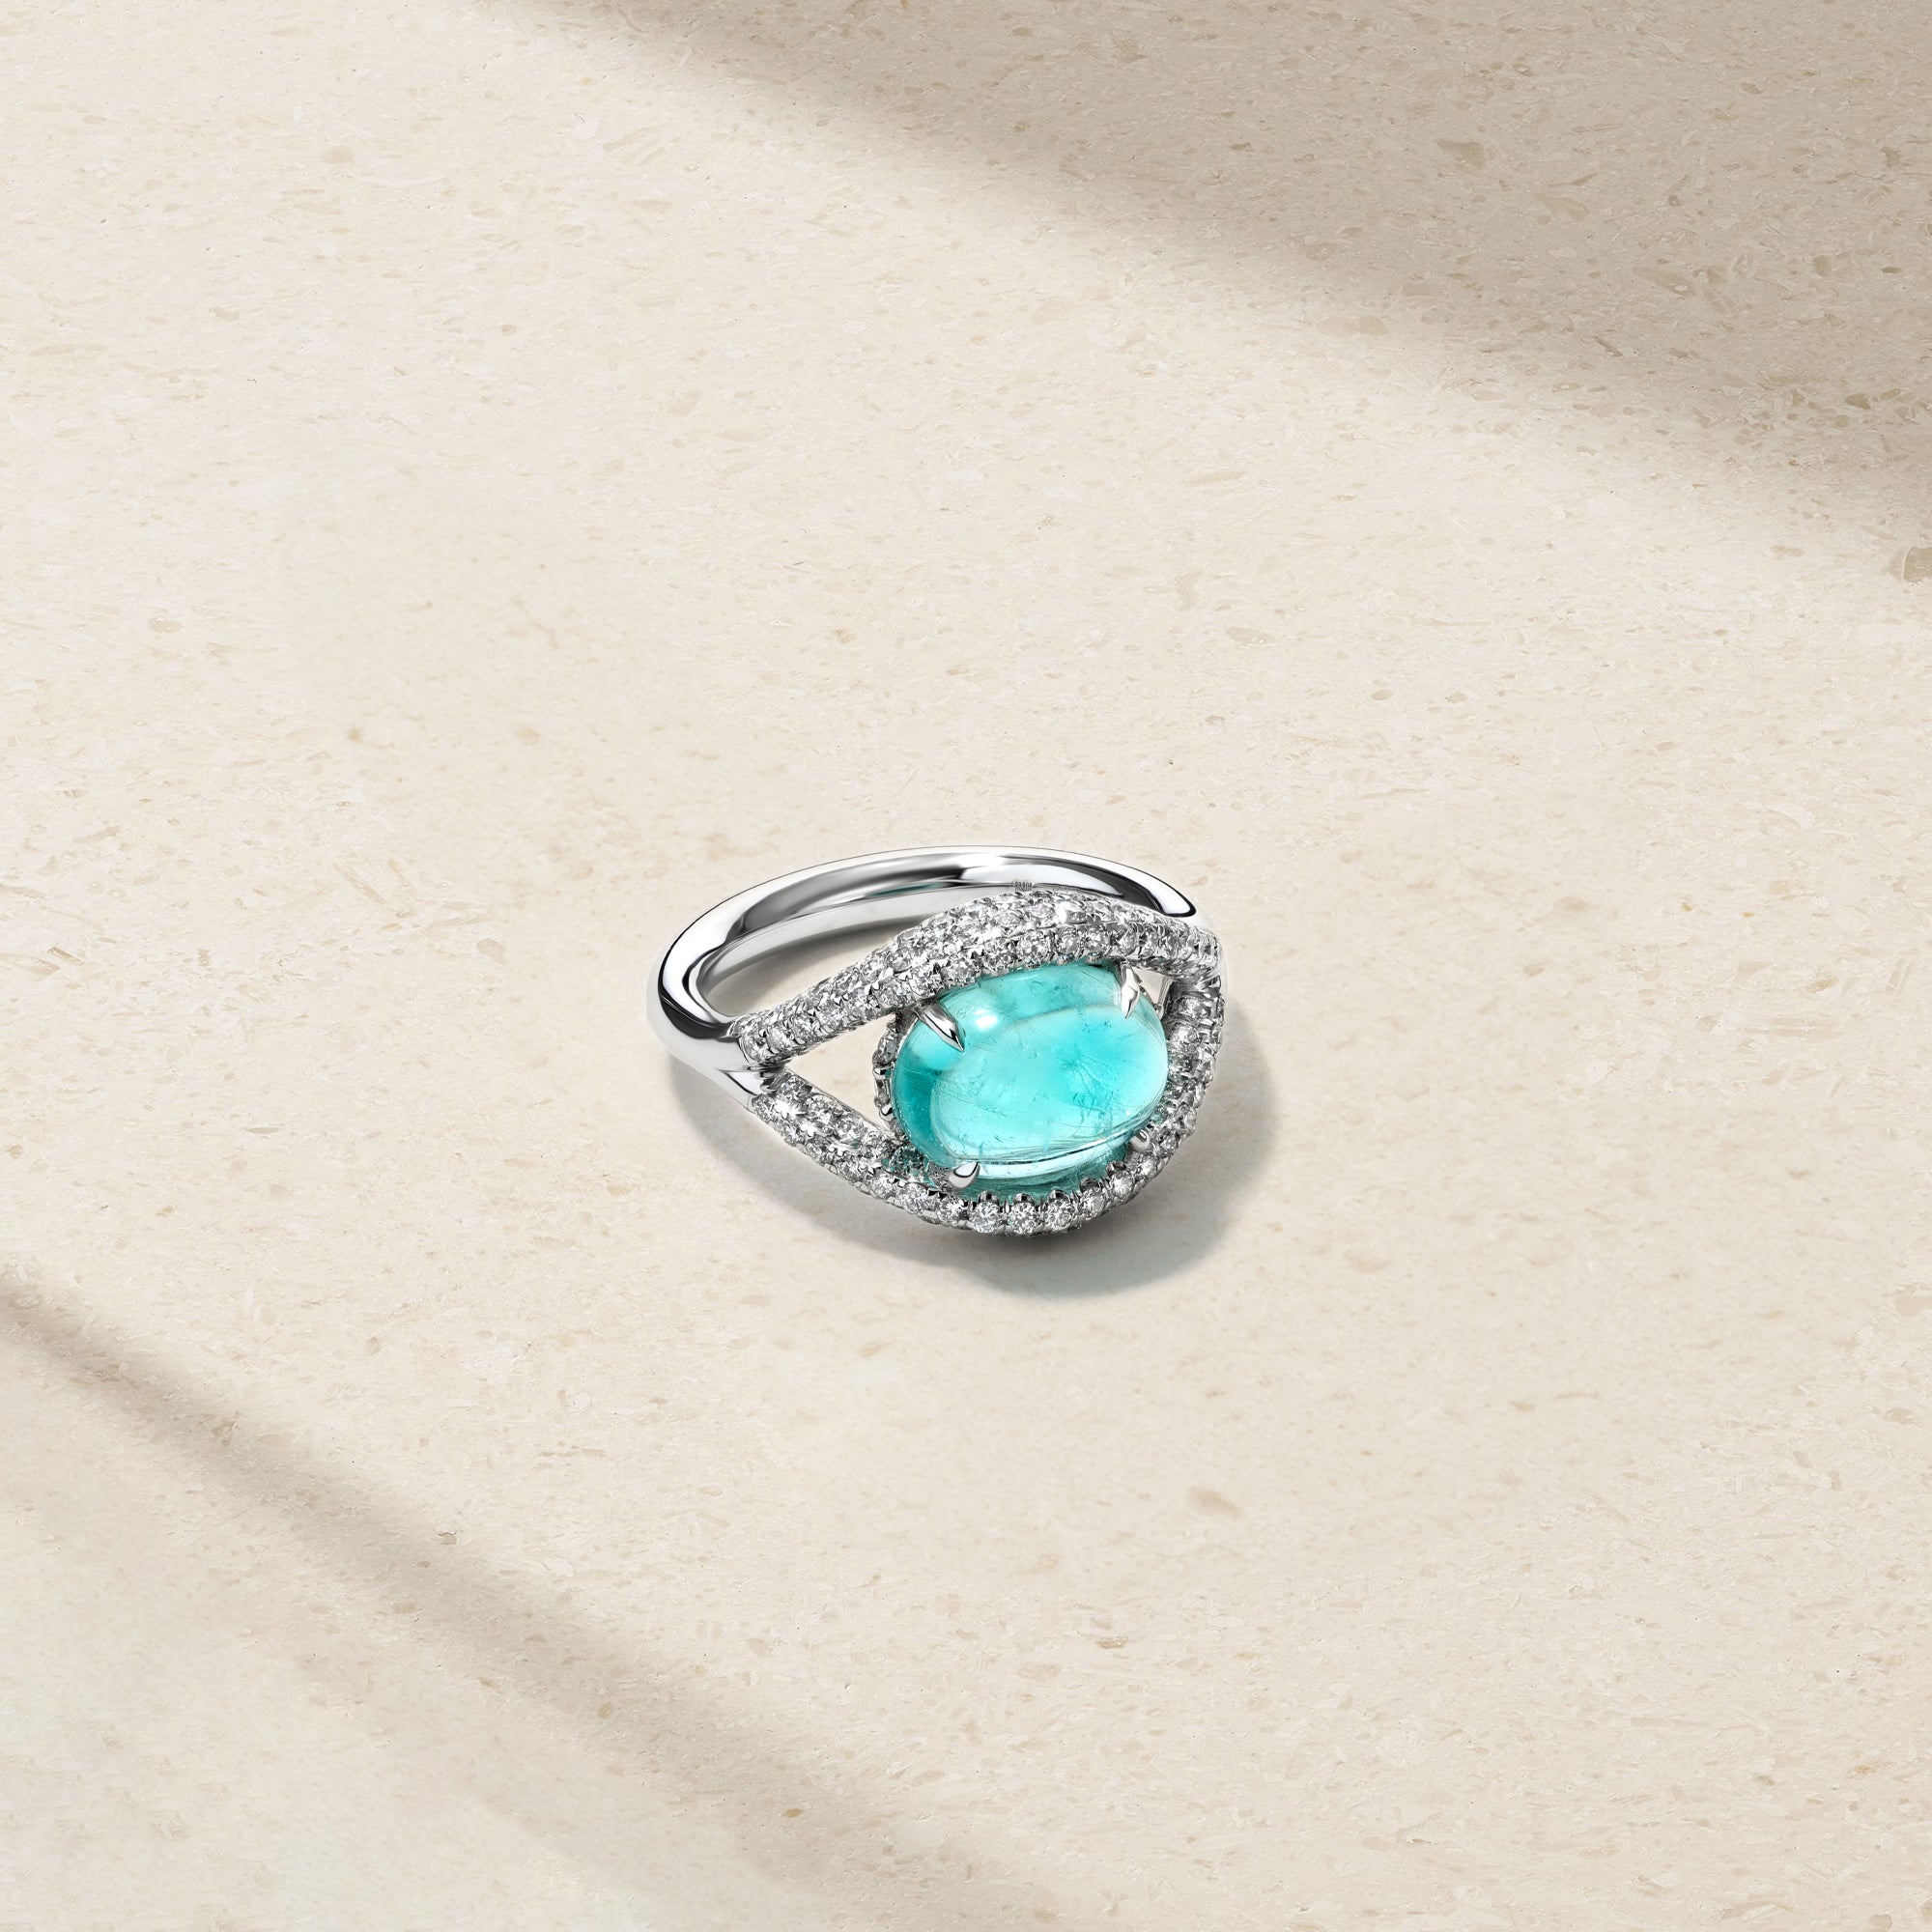 Bedazzled Evil Eye Paraiba and Diamond Ring 18kt White Gold / 5.5